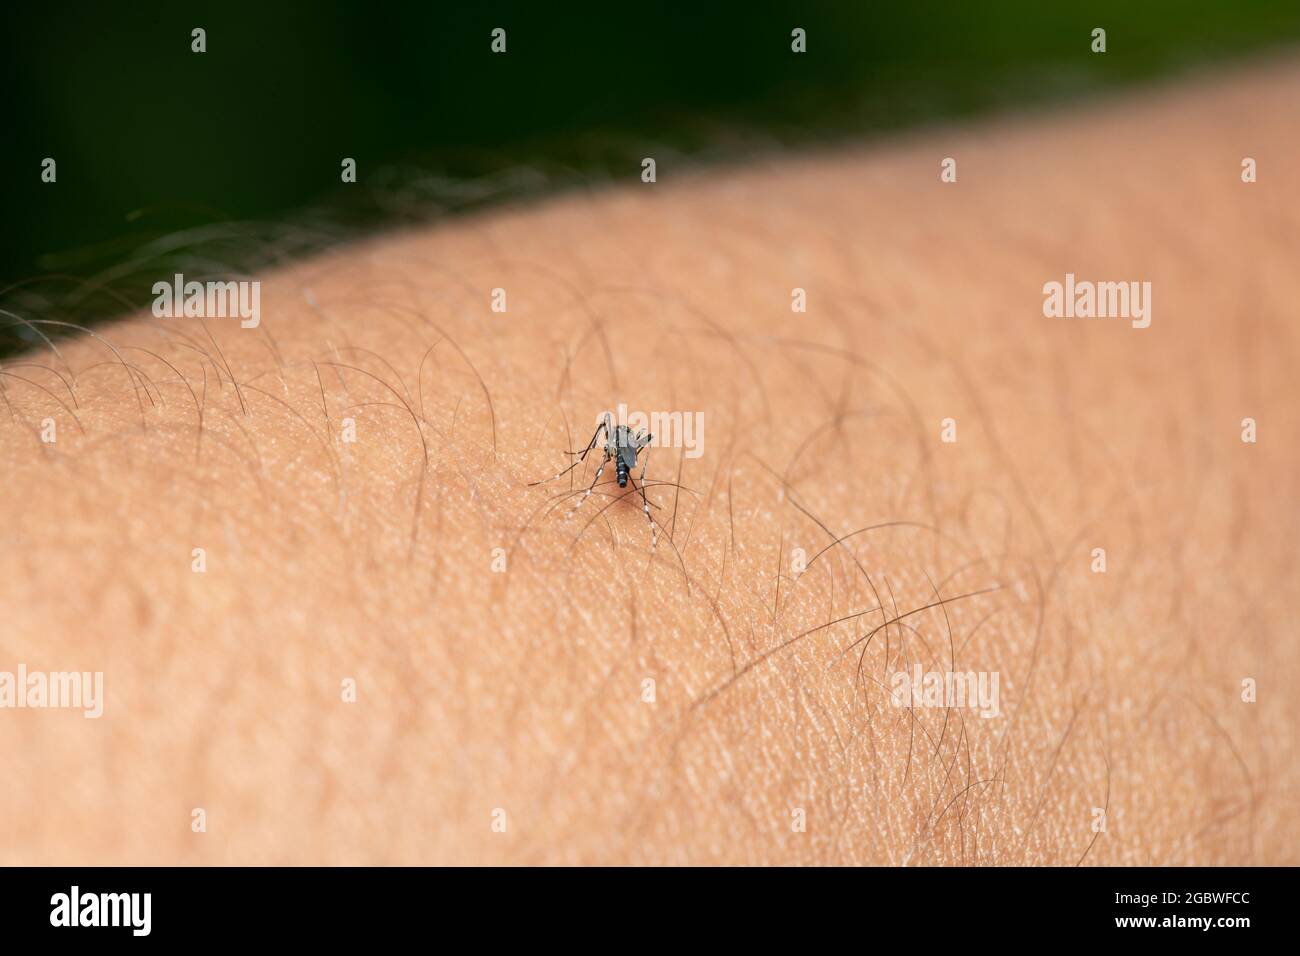 Asian tiger mosquito (Aedes albopictus) biting skin and feeding on human blood Stock Photo